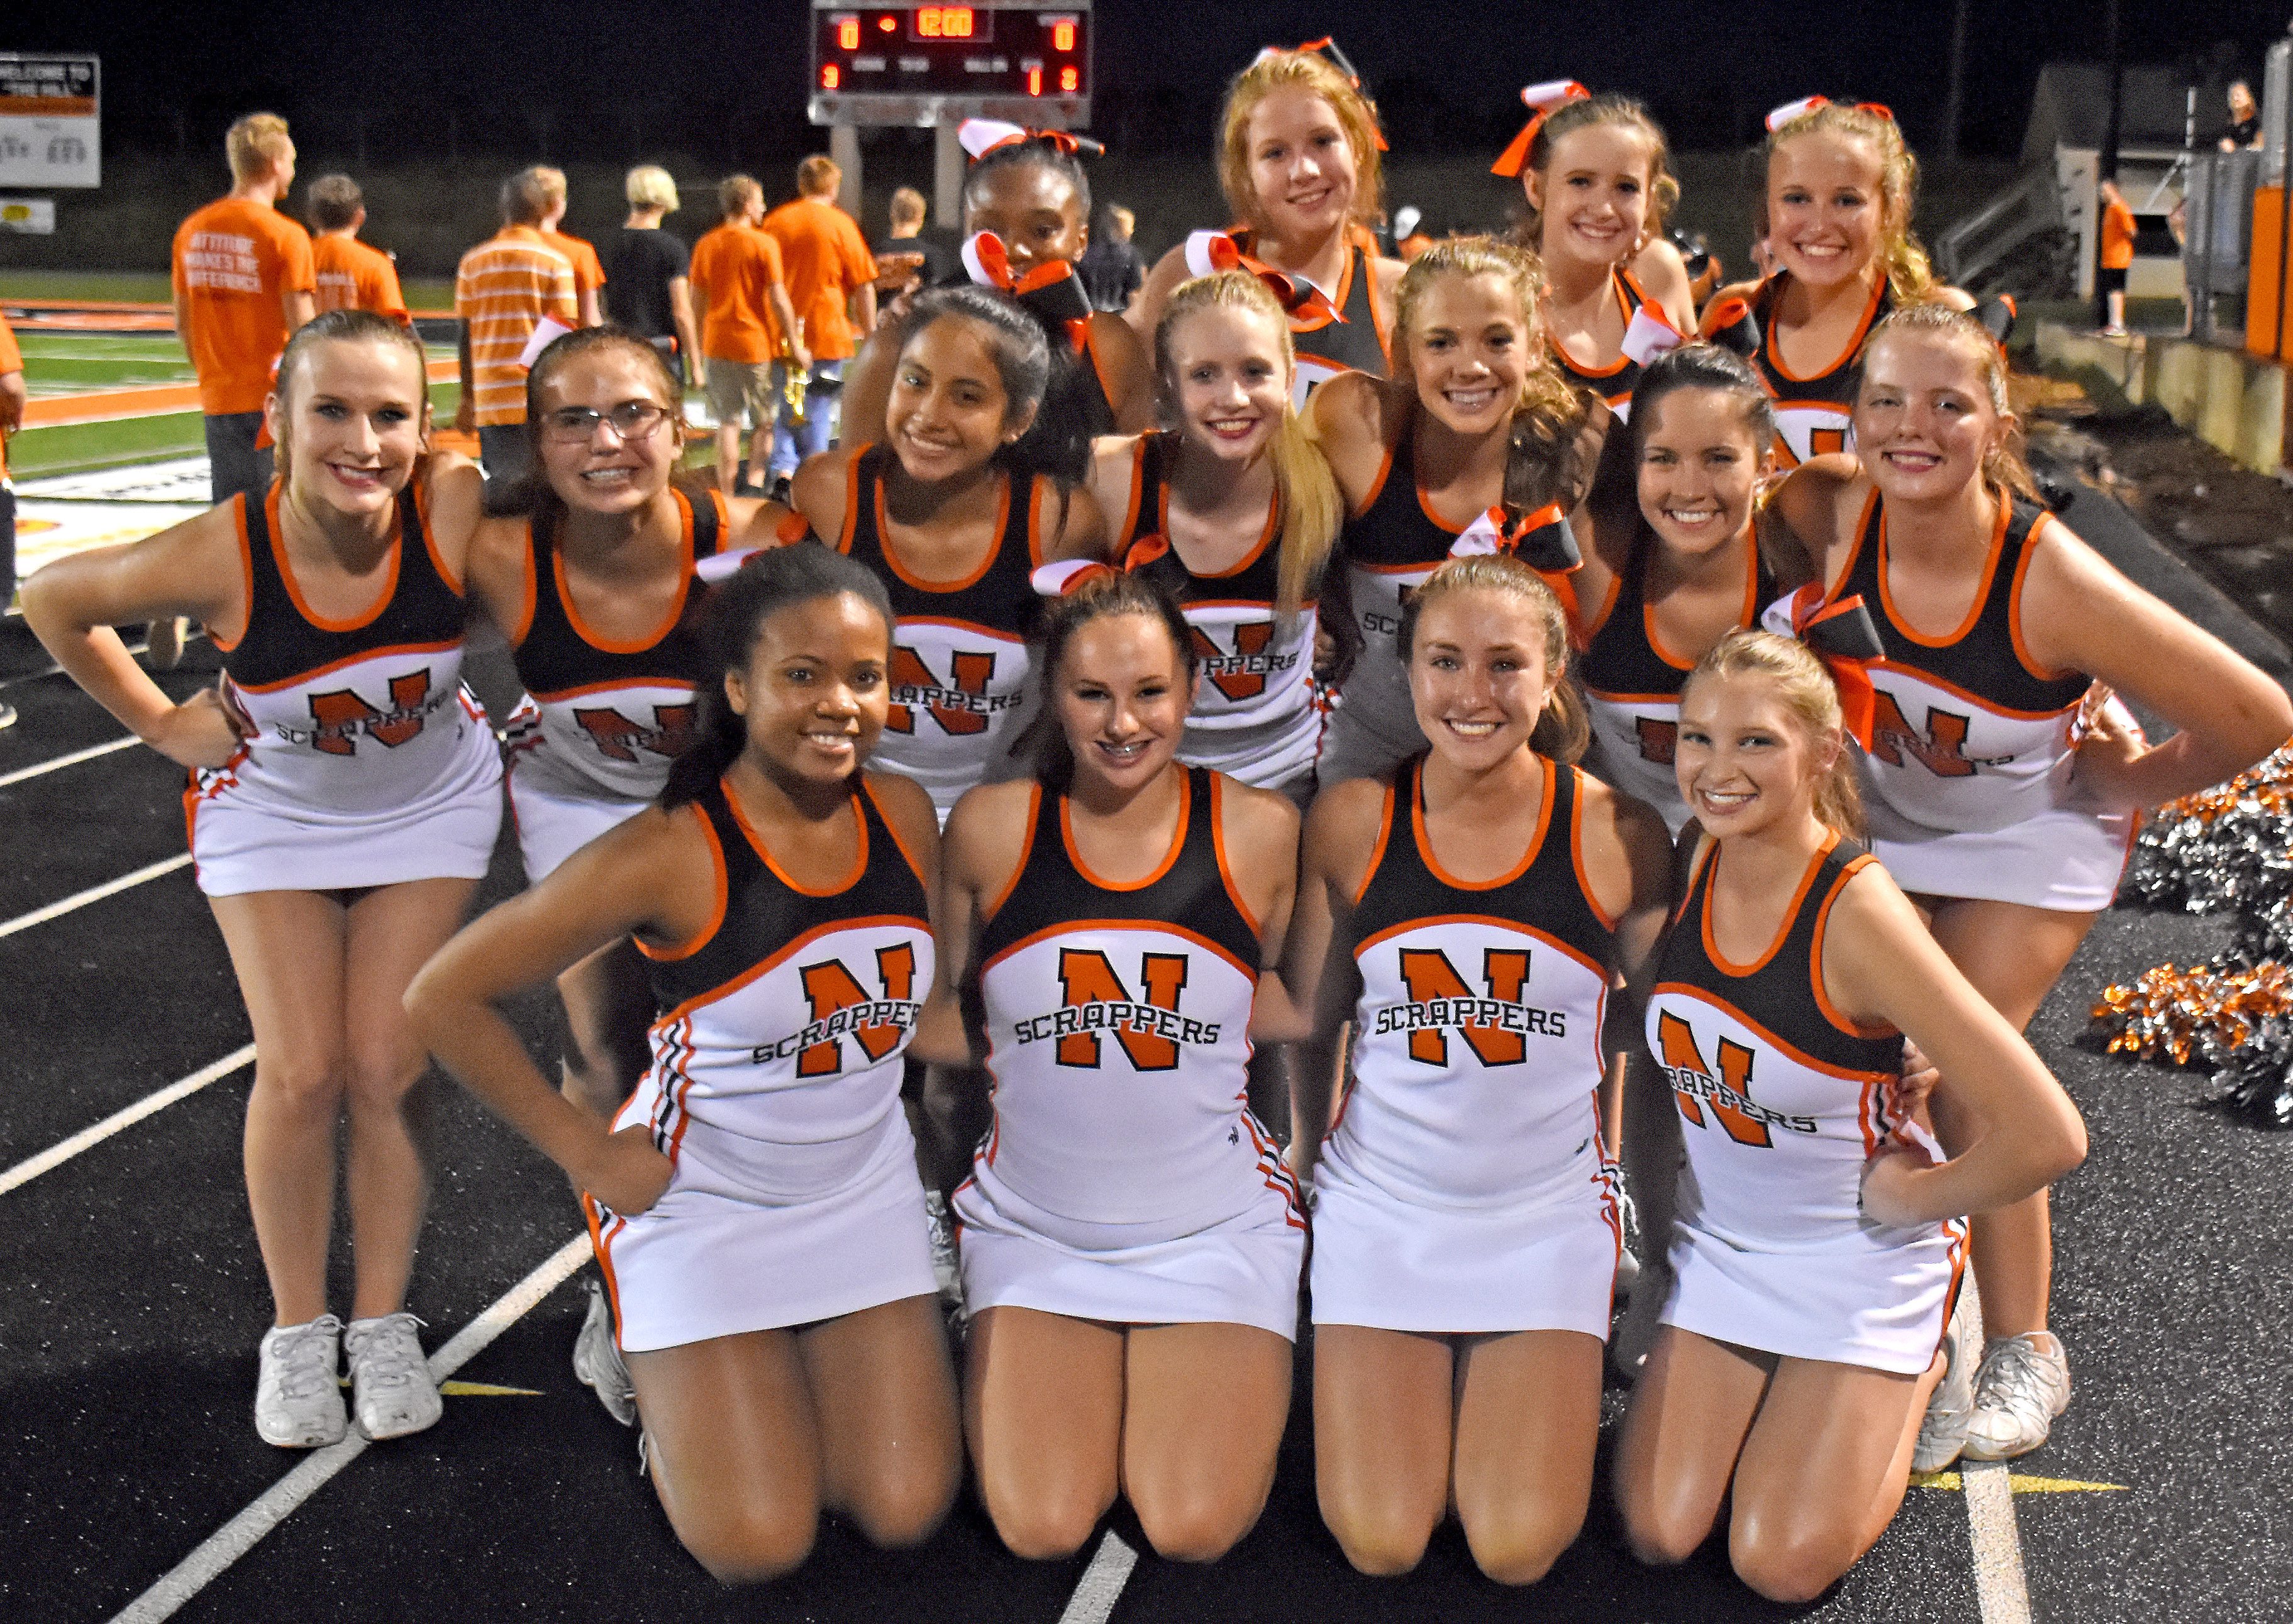 NHS cheerleaders: The squad includes (front row) seniors Asia Harris, Nicole Dodson, McKenzie Morphew, Chelsey Hile; (second row) juniors Lindsey O'Donnell, Jordan Revels, Monique Flores, Mackenzie Brown, Olivia Herzog, Leslie Lingo, Breanna Peebles; (back row) sophomores Steyanna Bailey, Cecily Sweeden, Hannah Faulkner, and Julianne Futrell.